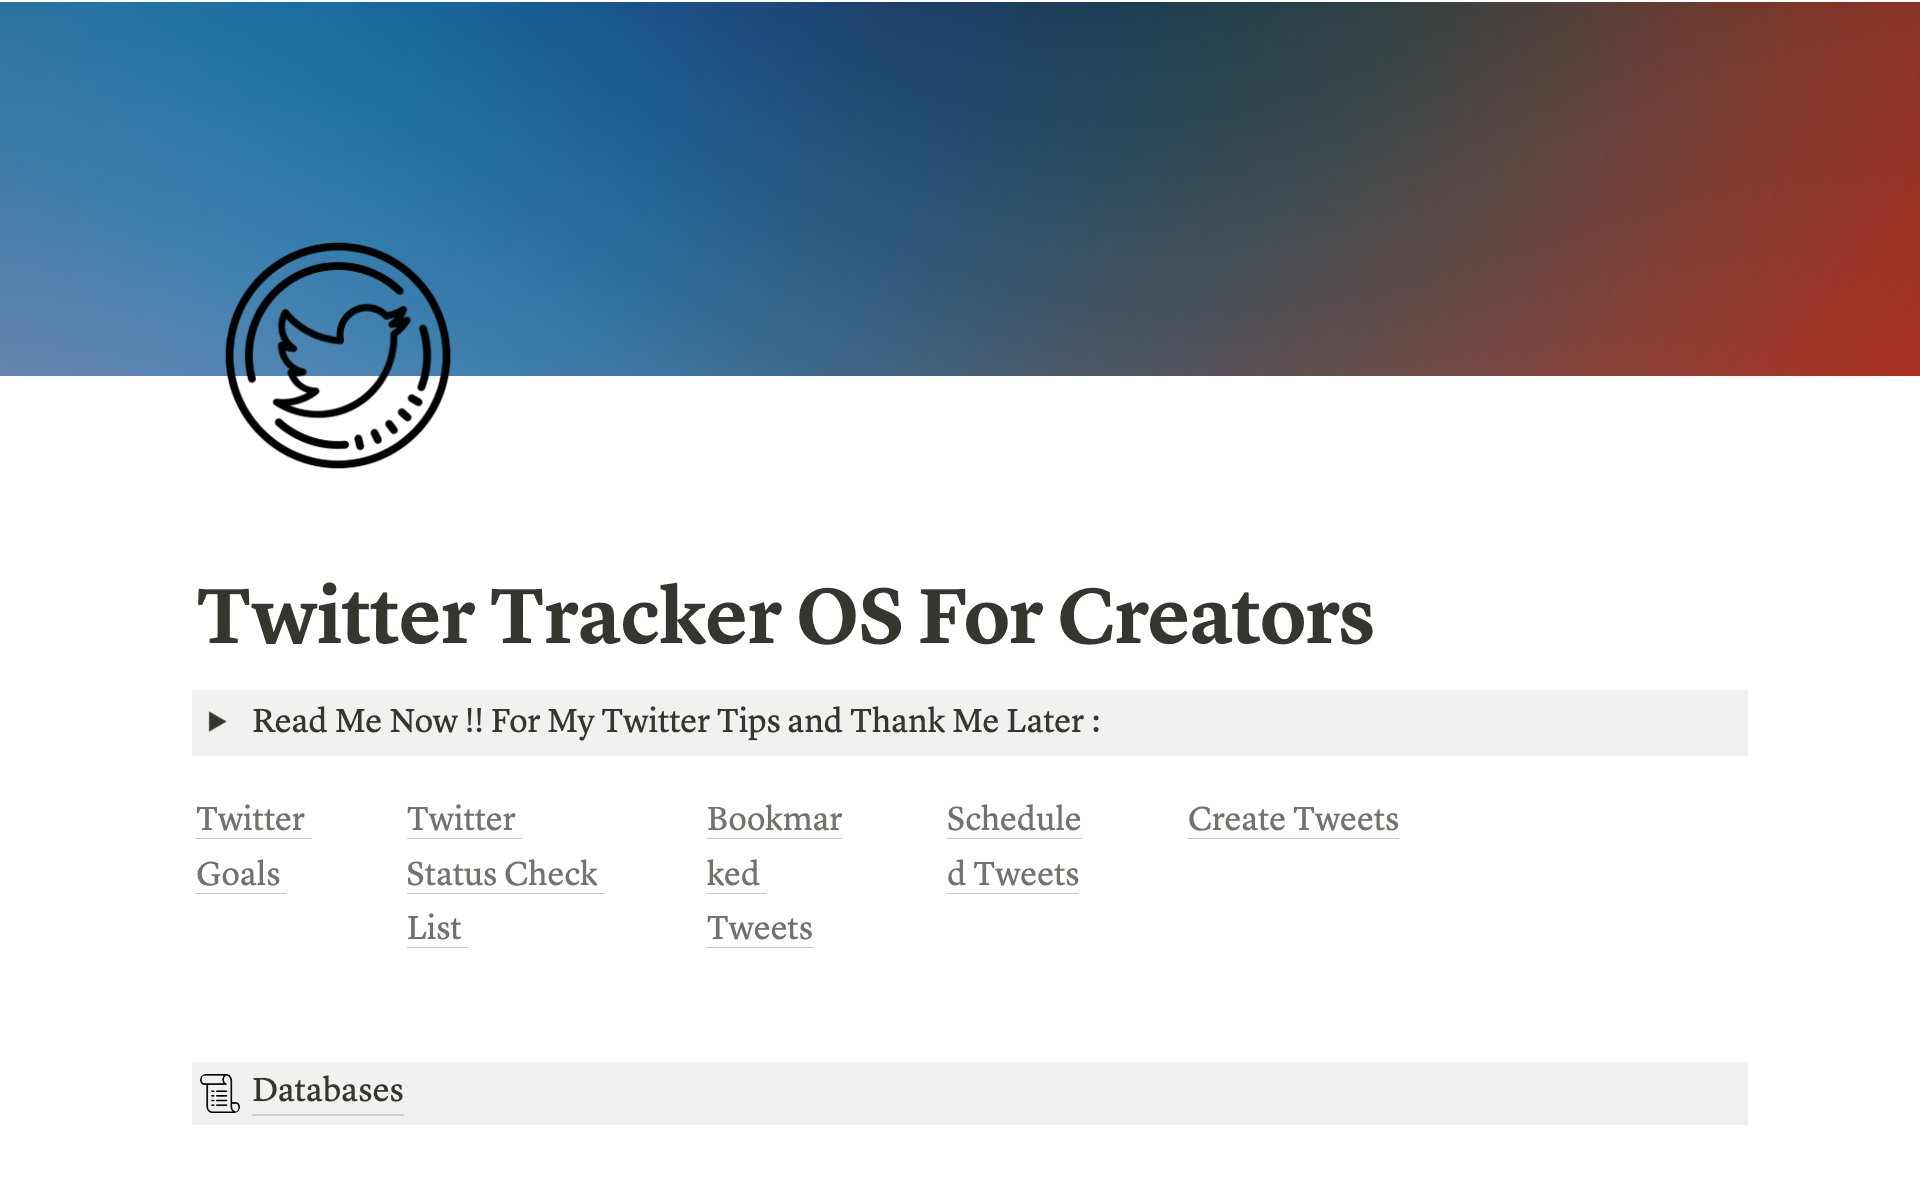 With Twitter OS for creators you can create content, analyze progress and manage your feed.